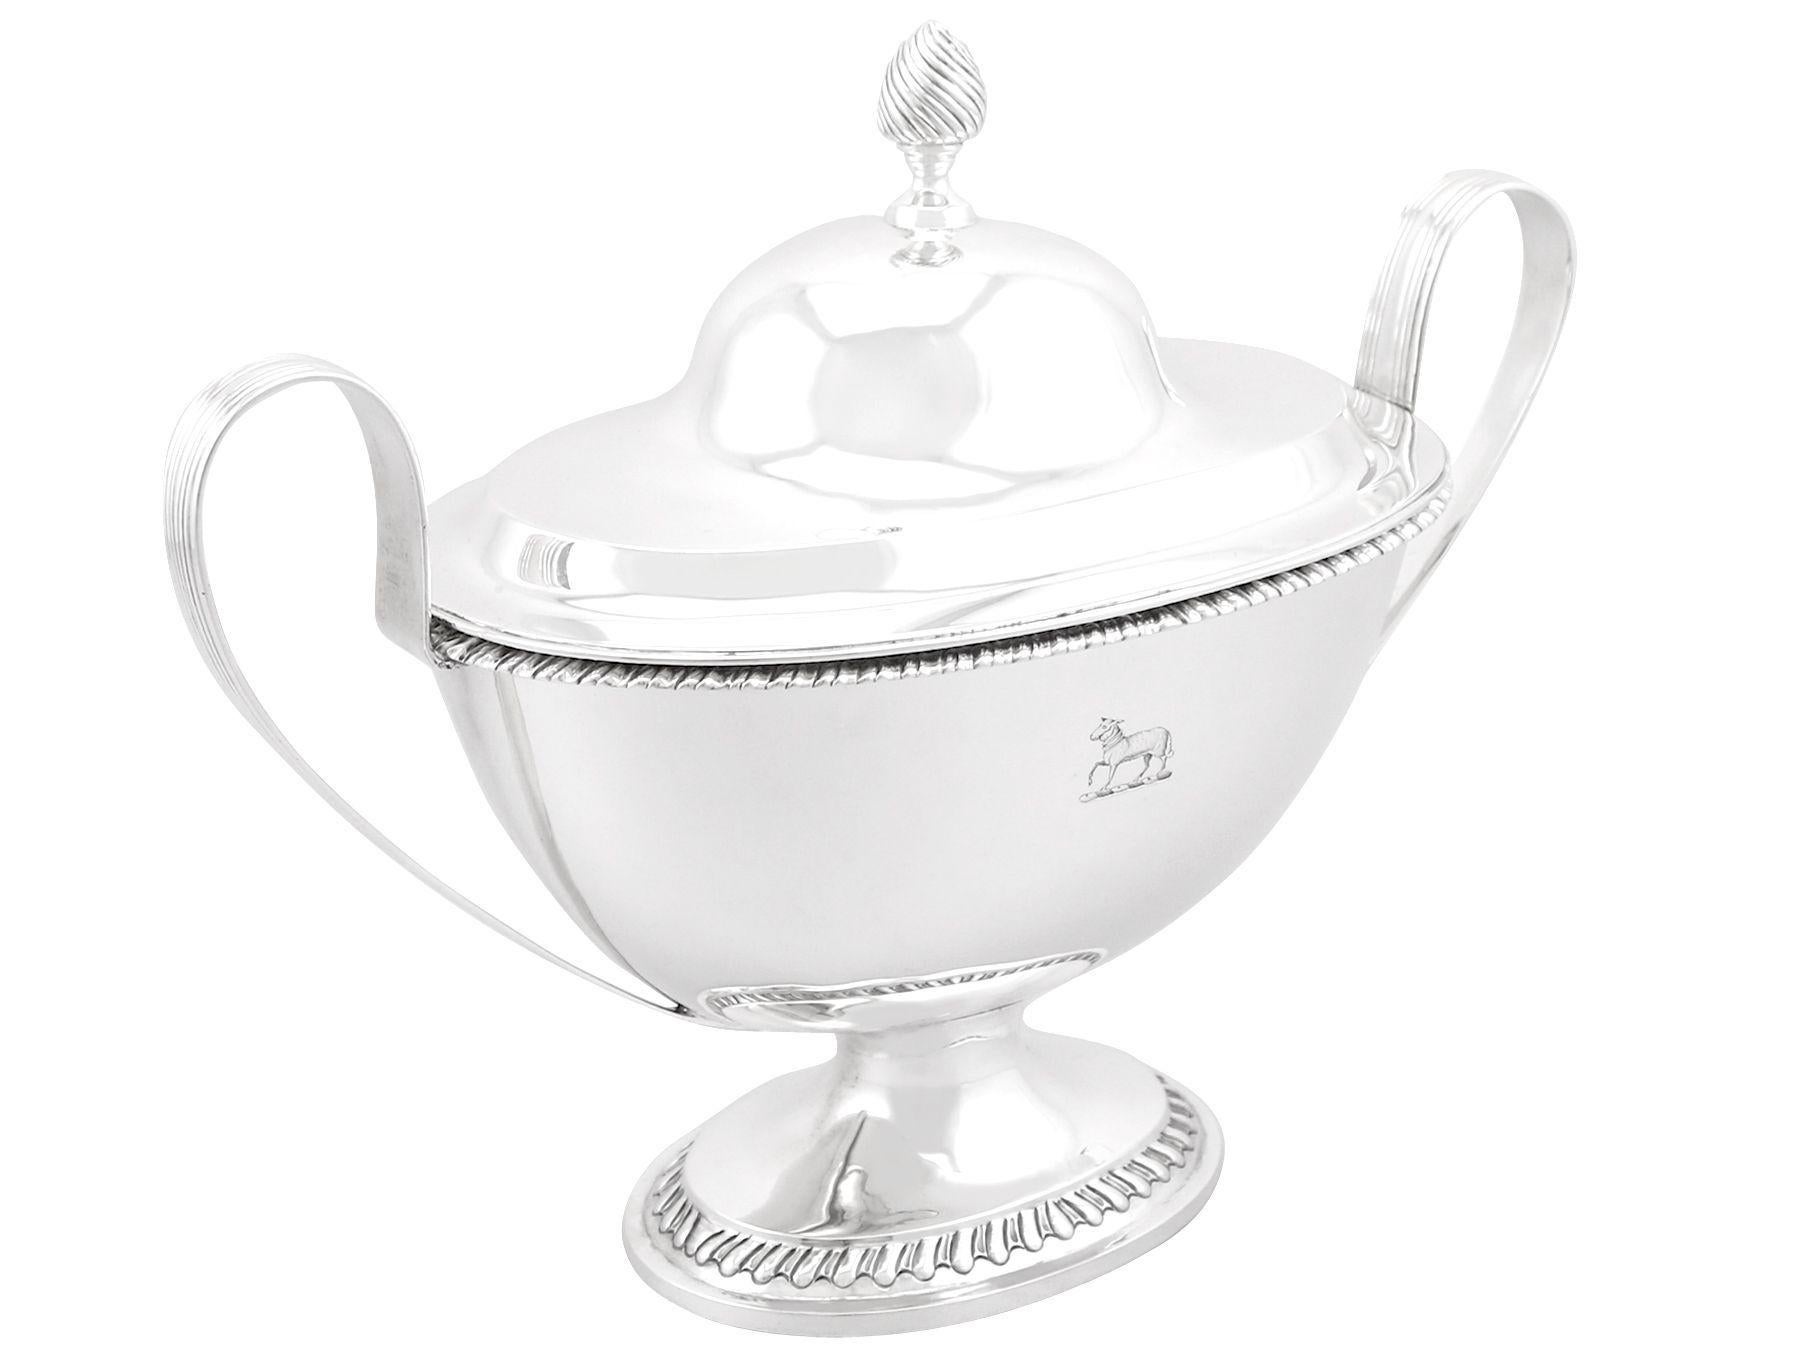 An exceptional, fine and impressive antique Victorian English sterling silver tureen; an addition to our range of collectable dining silverware

This exceptional antique Victorian sterling silver tureen has a plain oval shaped form onto a plain